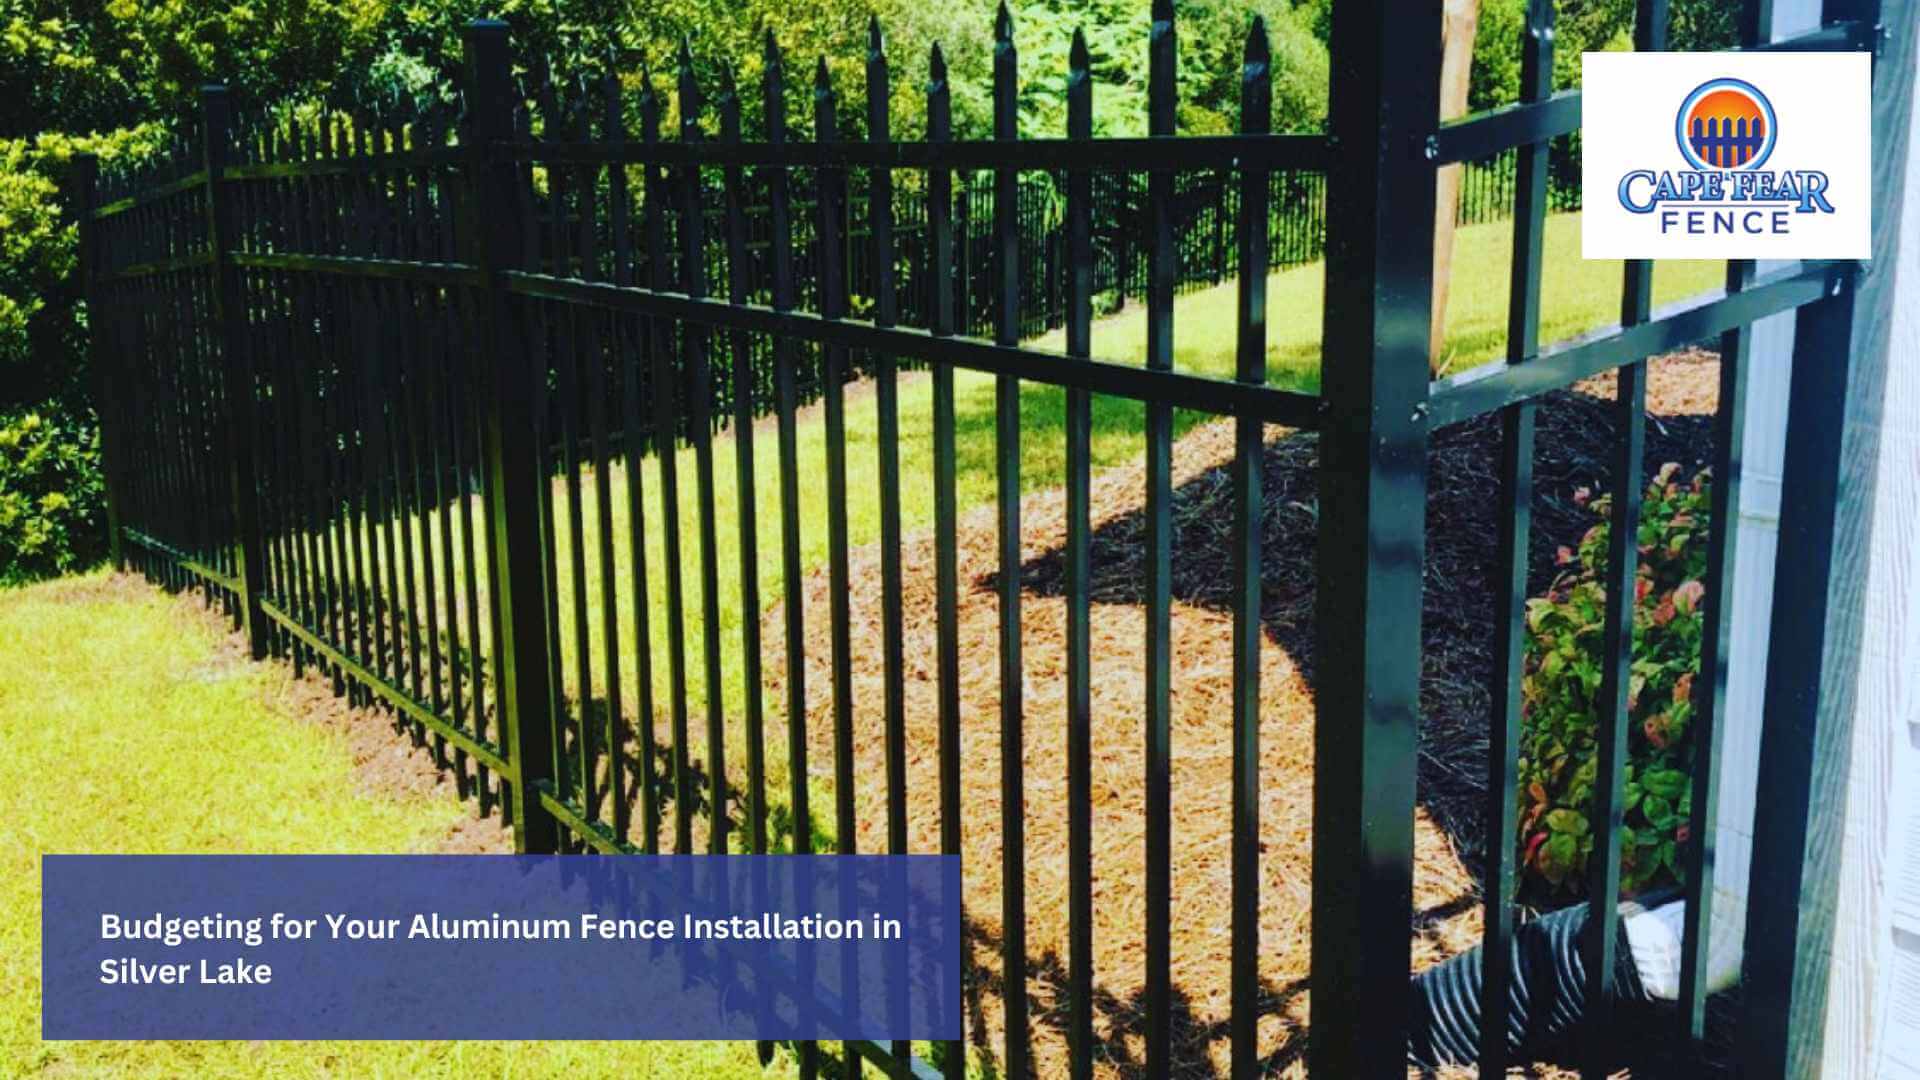 Budgeting for Your Aluminum Fence Installation in Silver Lake